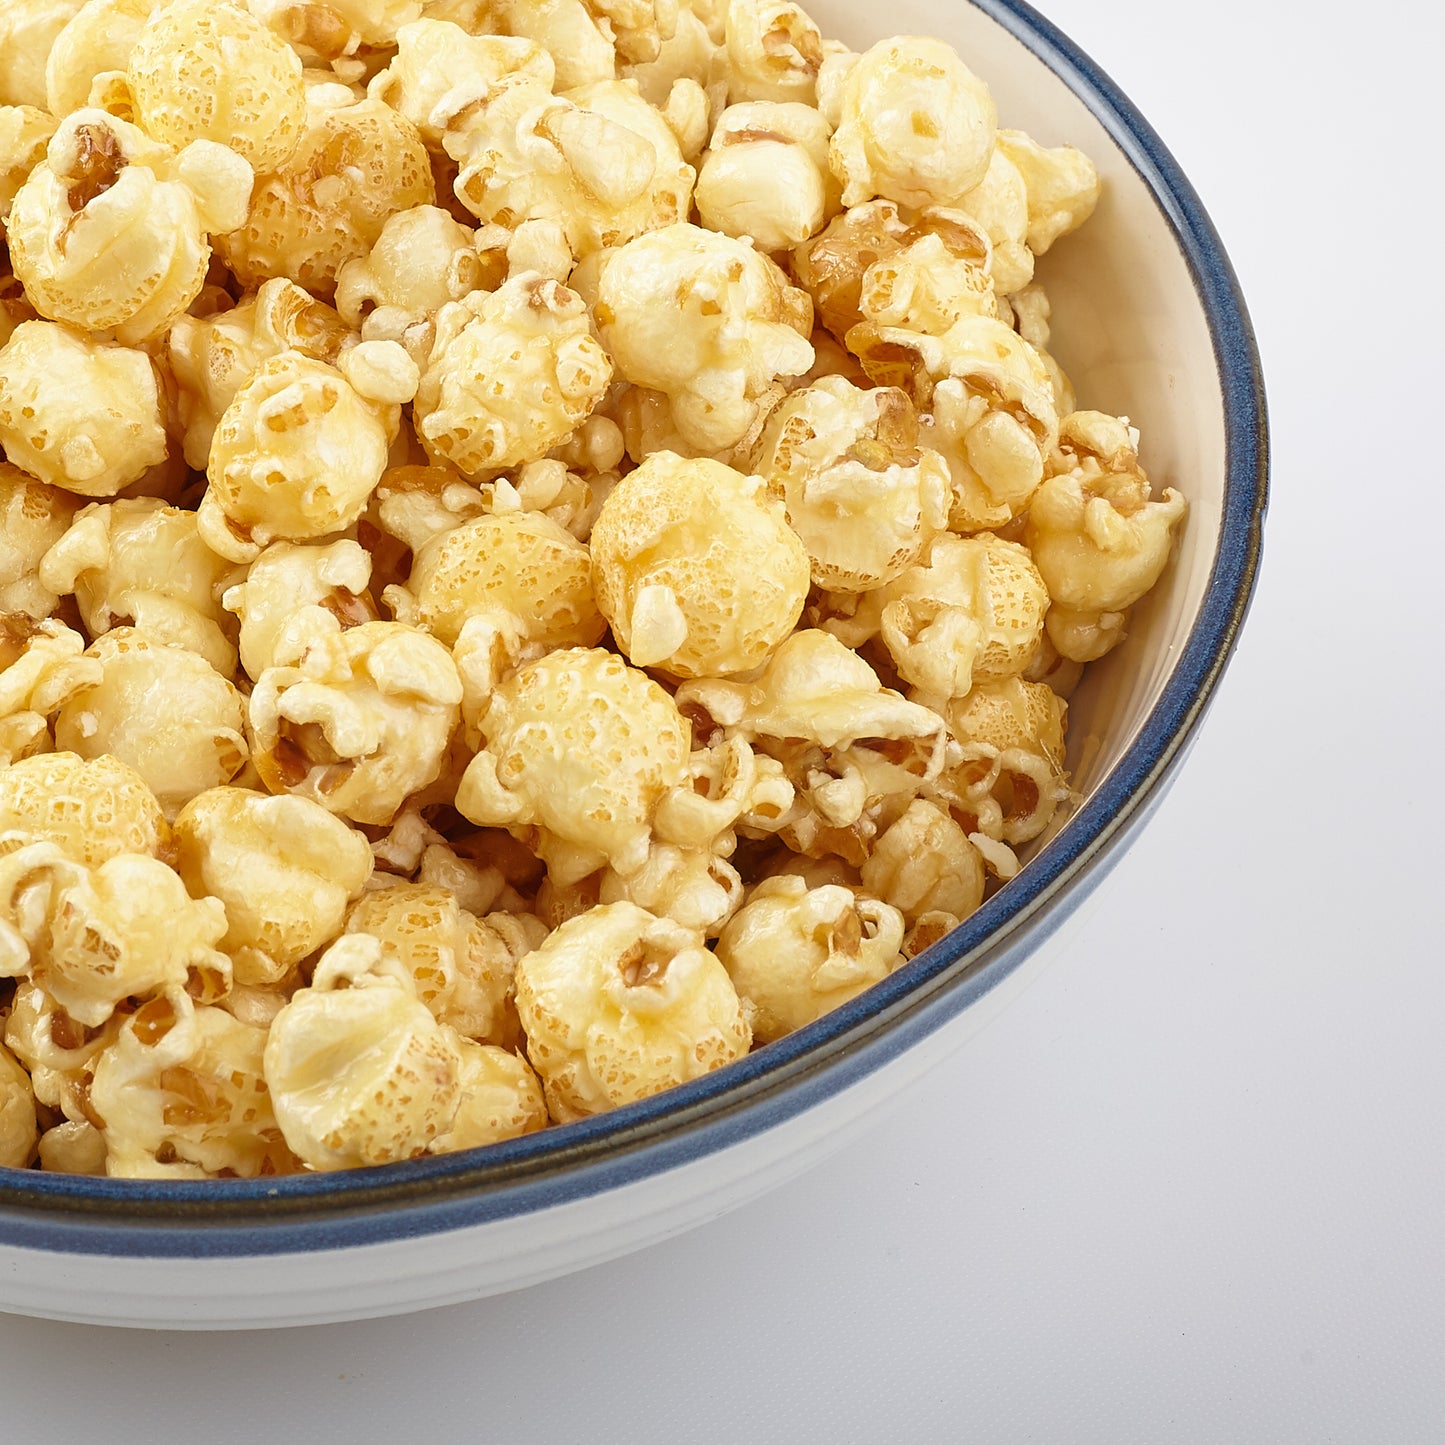 Just look at that delicious Salted Caramel Popcorn. Perfectly popped and golden. This is cruch at first bite.